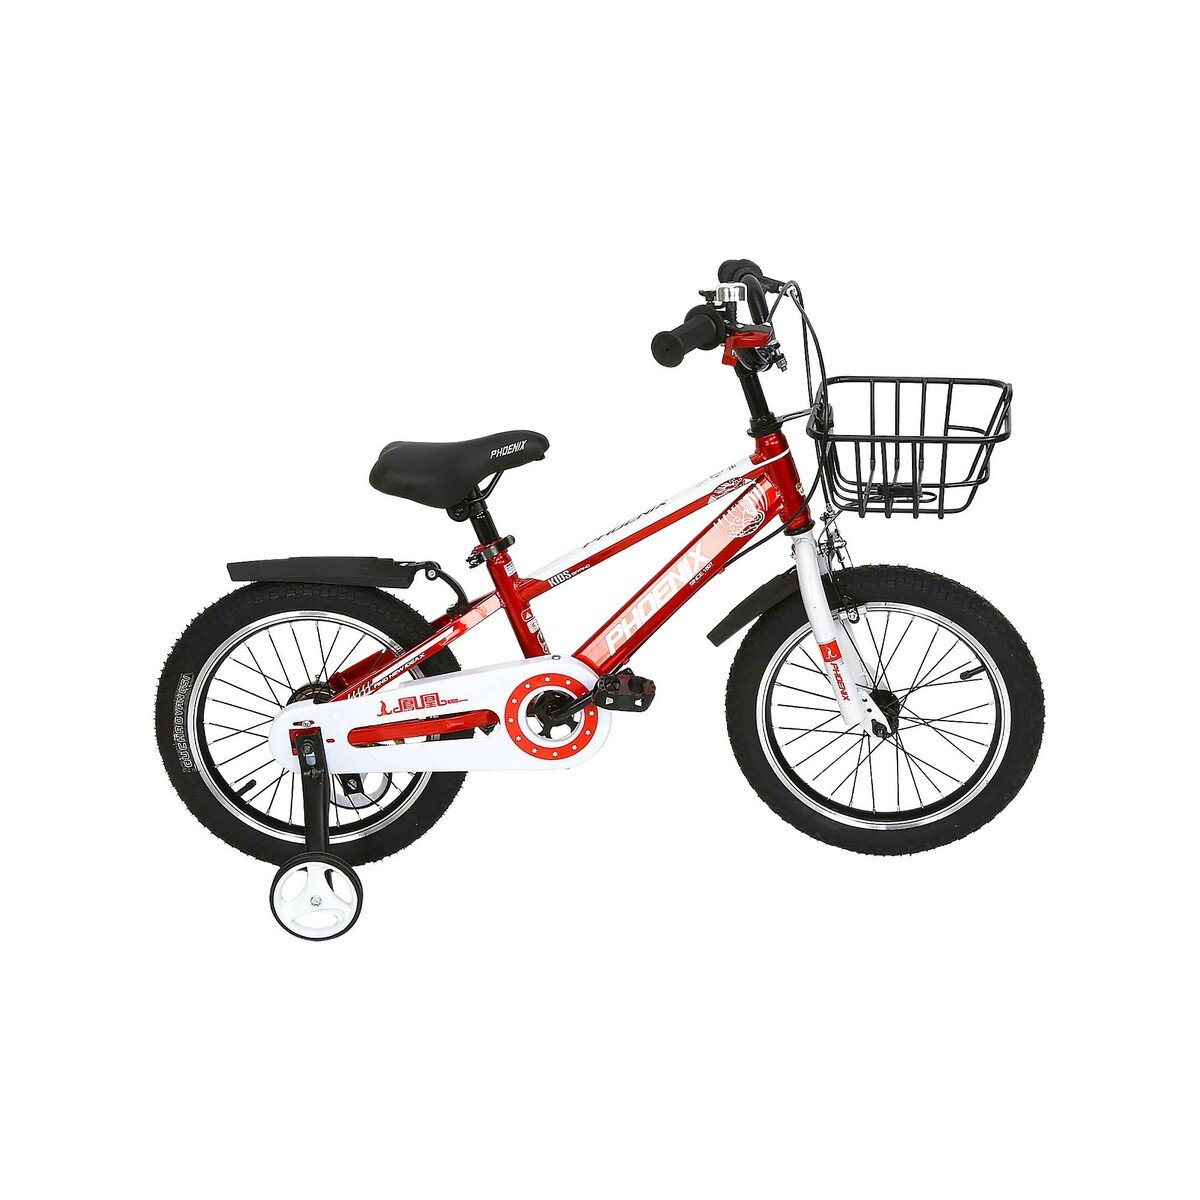 Skid Fusion Bicycle 16" XPG-16 Assorted Colors